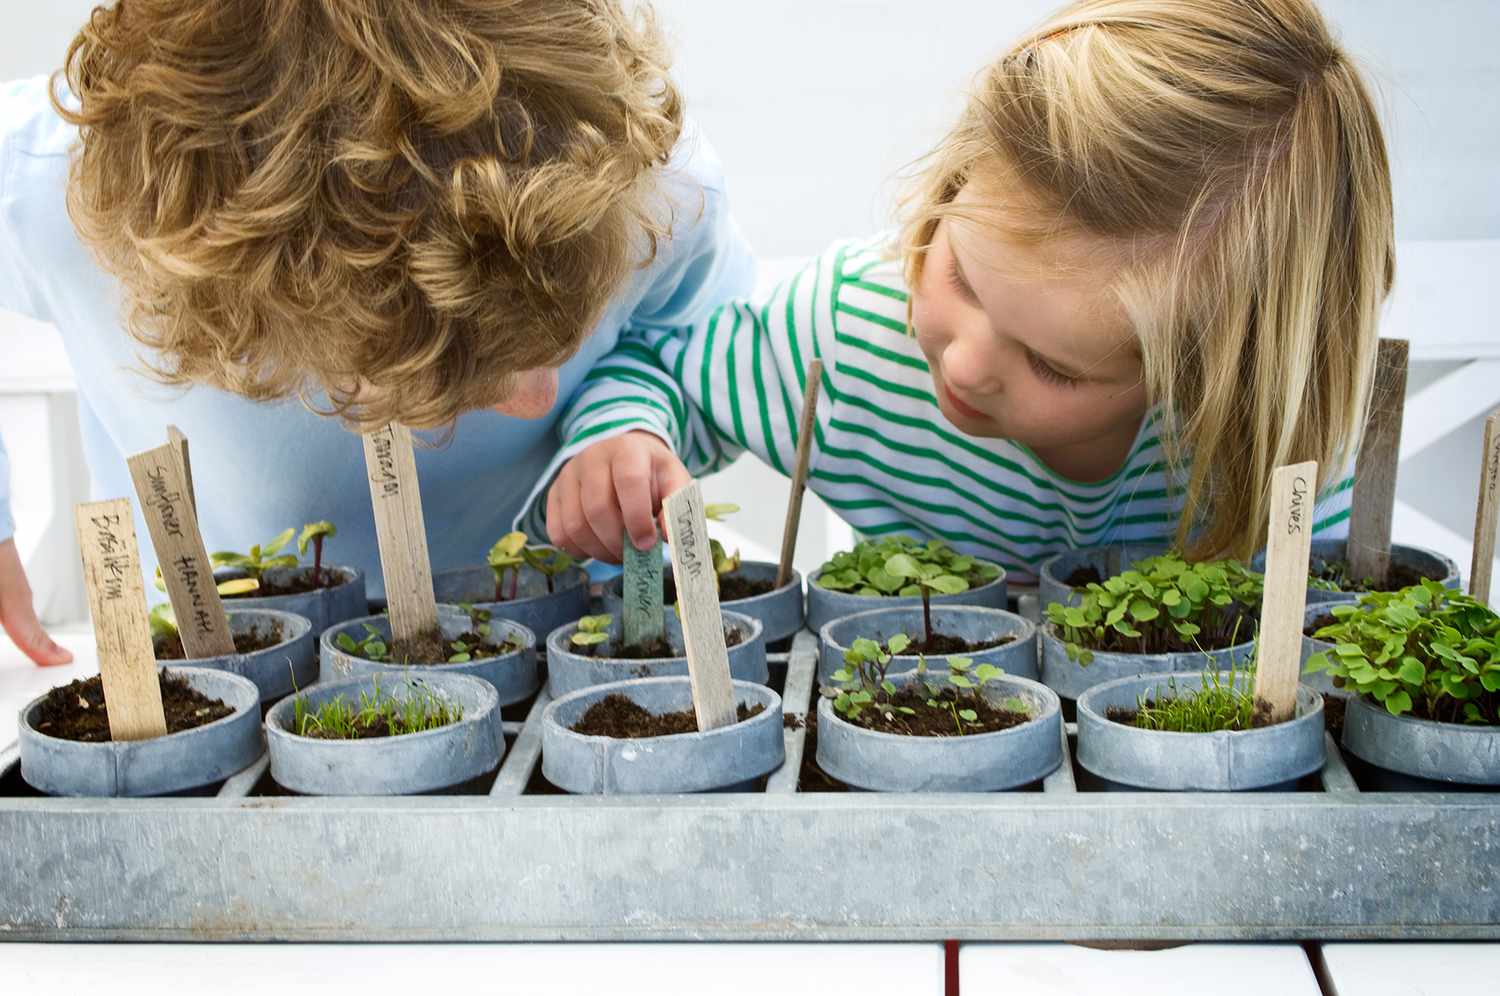 kids playing with a gardening kit and seedlings at home